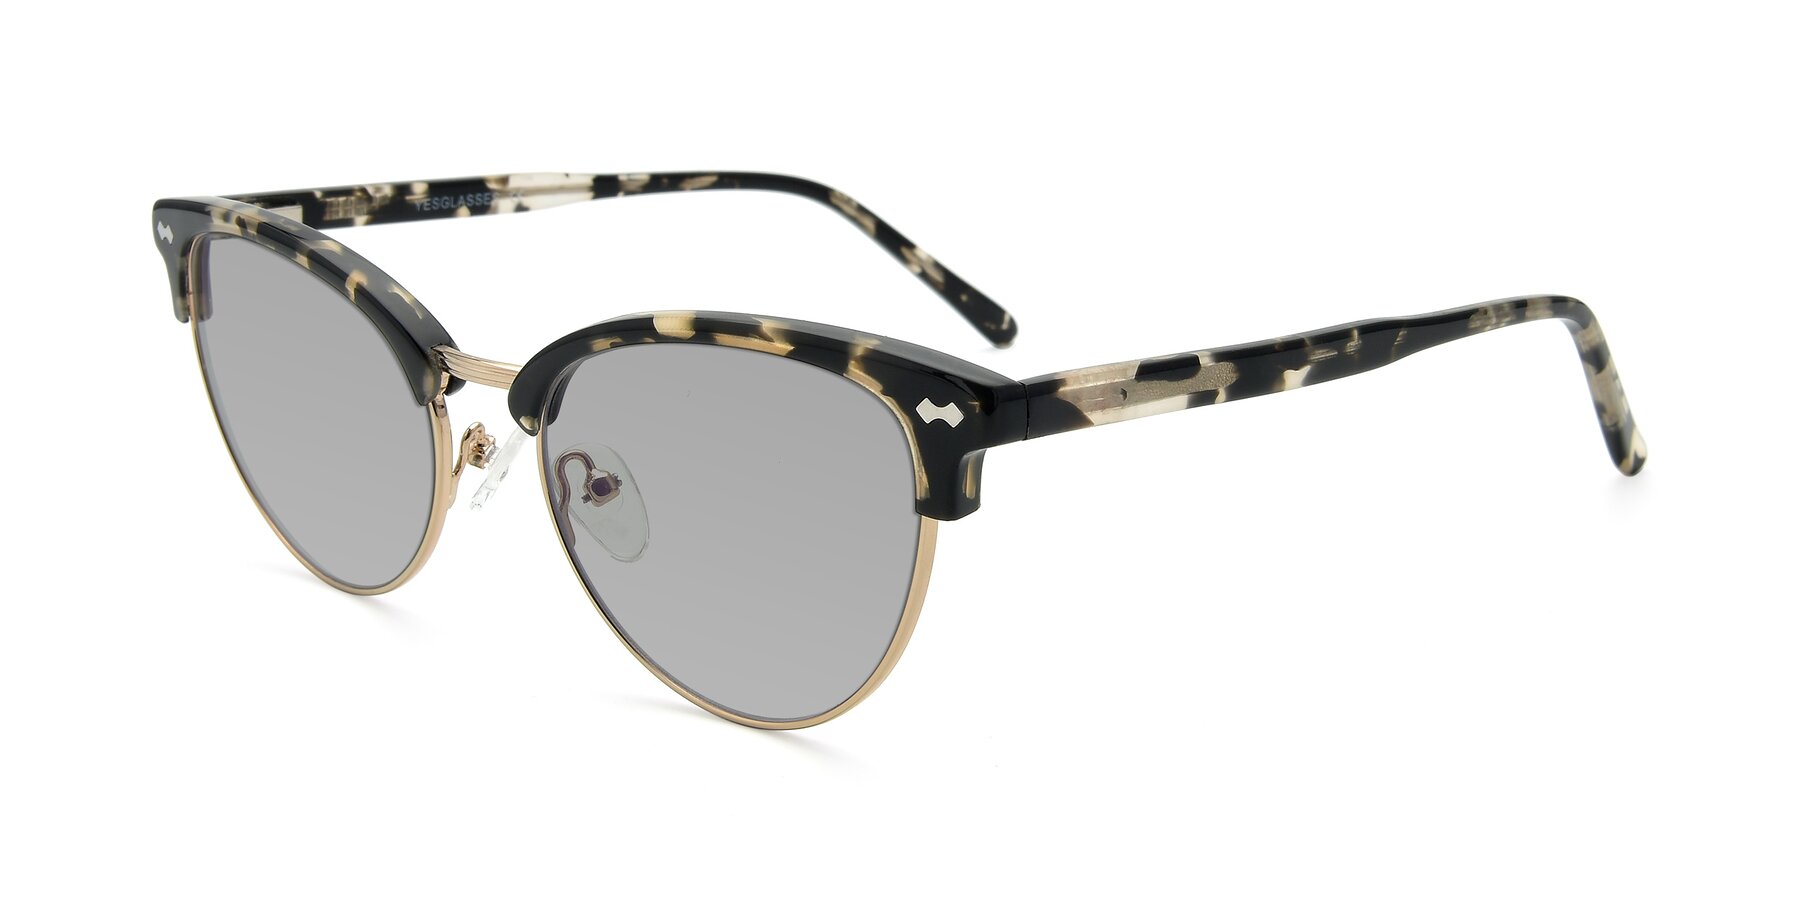 Angle of 17461 in Tortoise-Gold with Light Gray Tinted Lenses